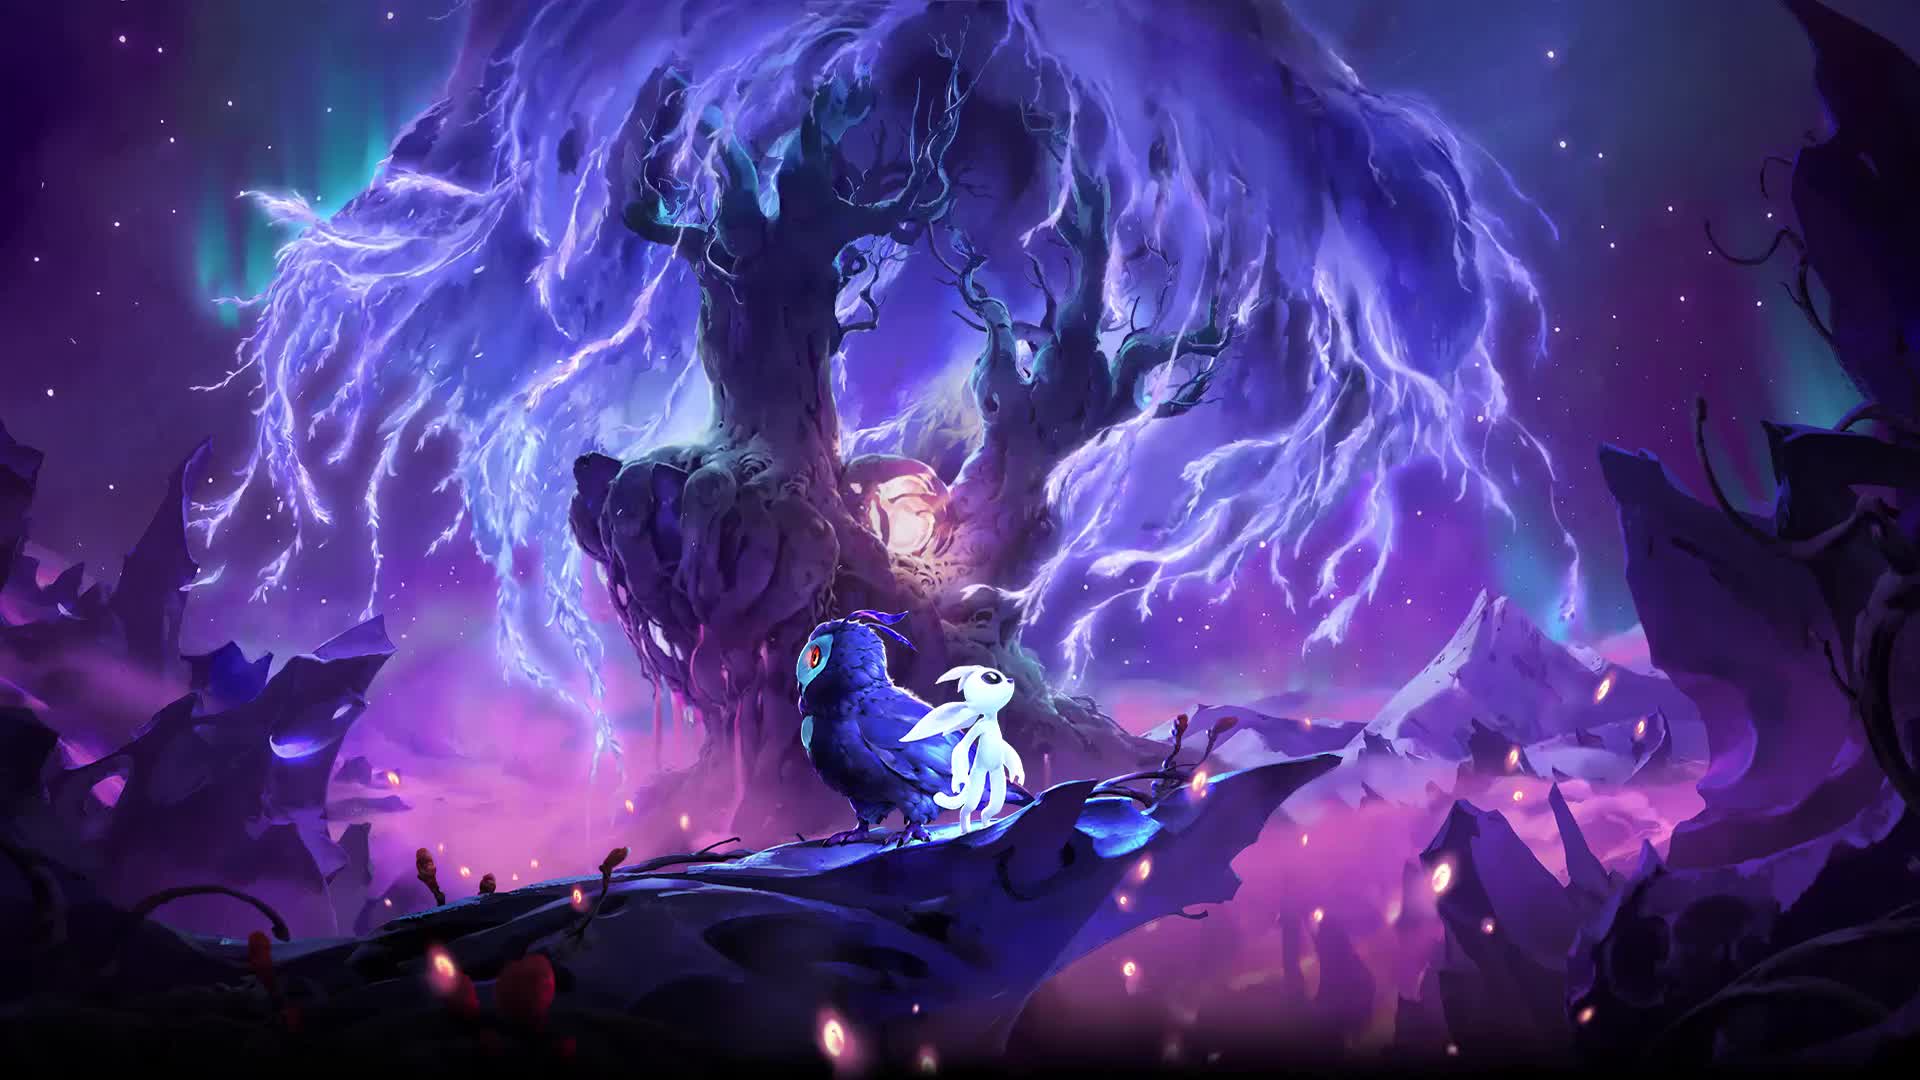 Wallpaper  Ori and the Will of the Whisps 1920x1080  Dmll  1813771  HD  Wallpapers  WallHere